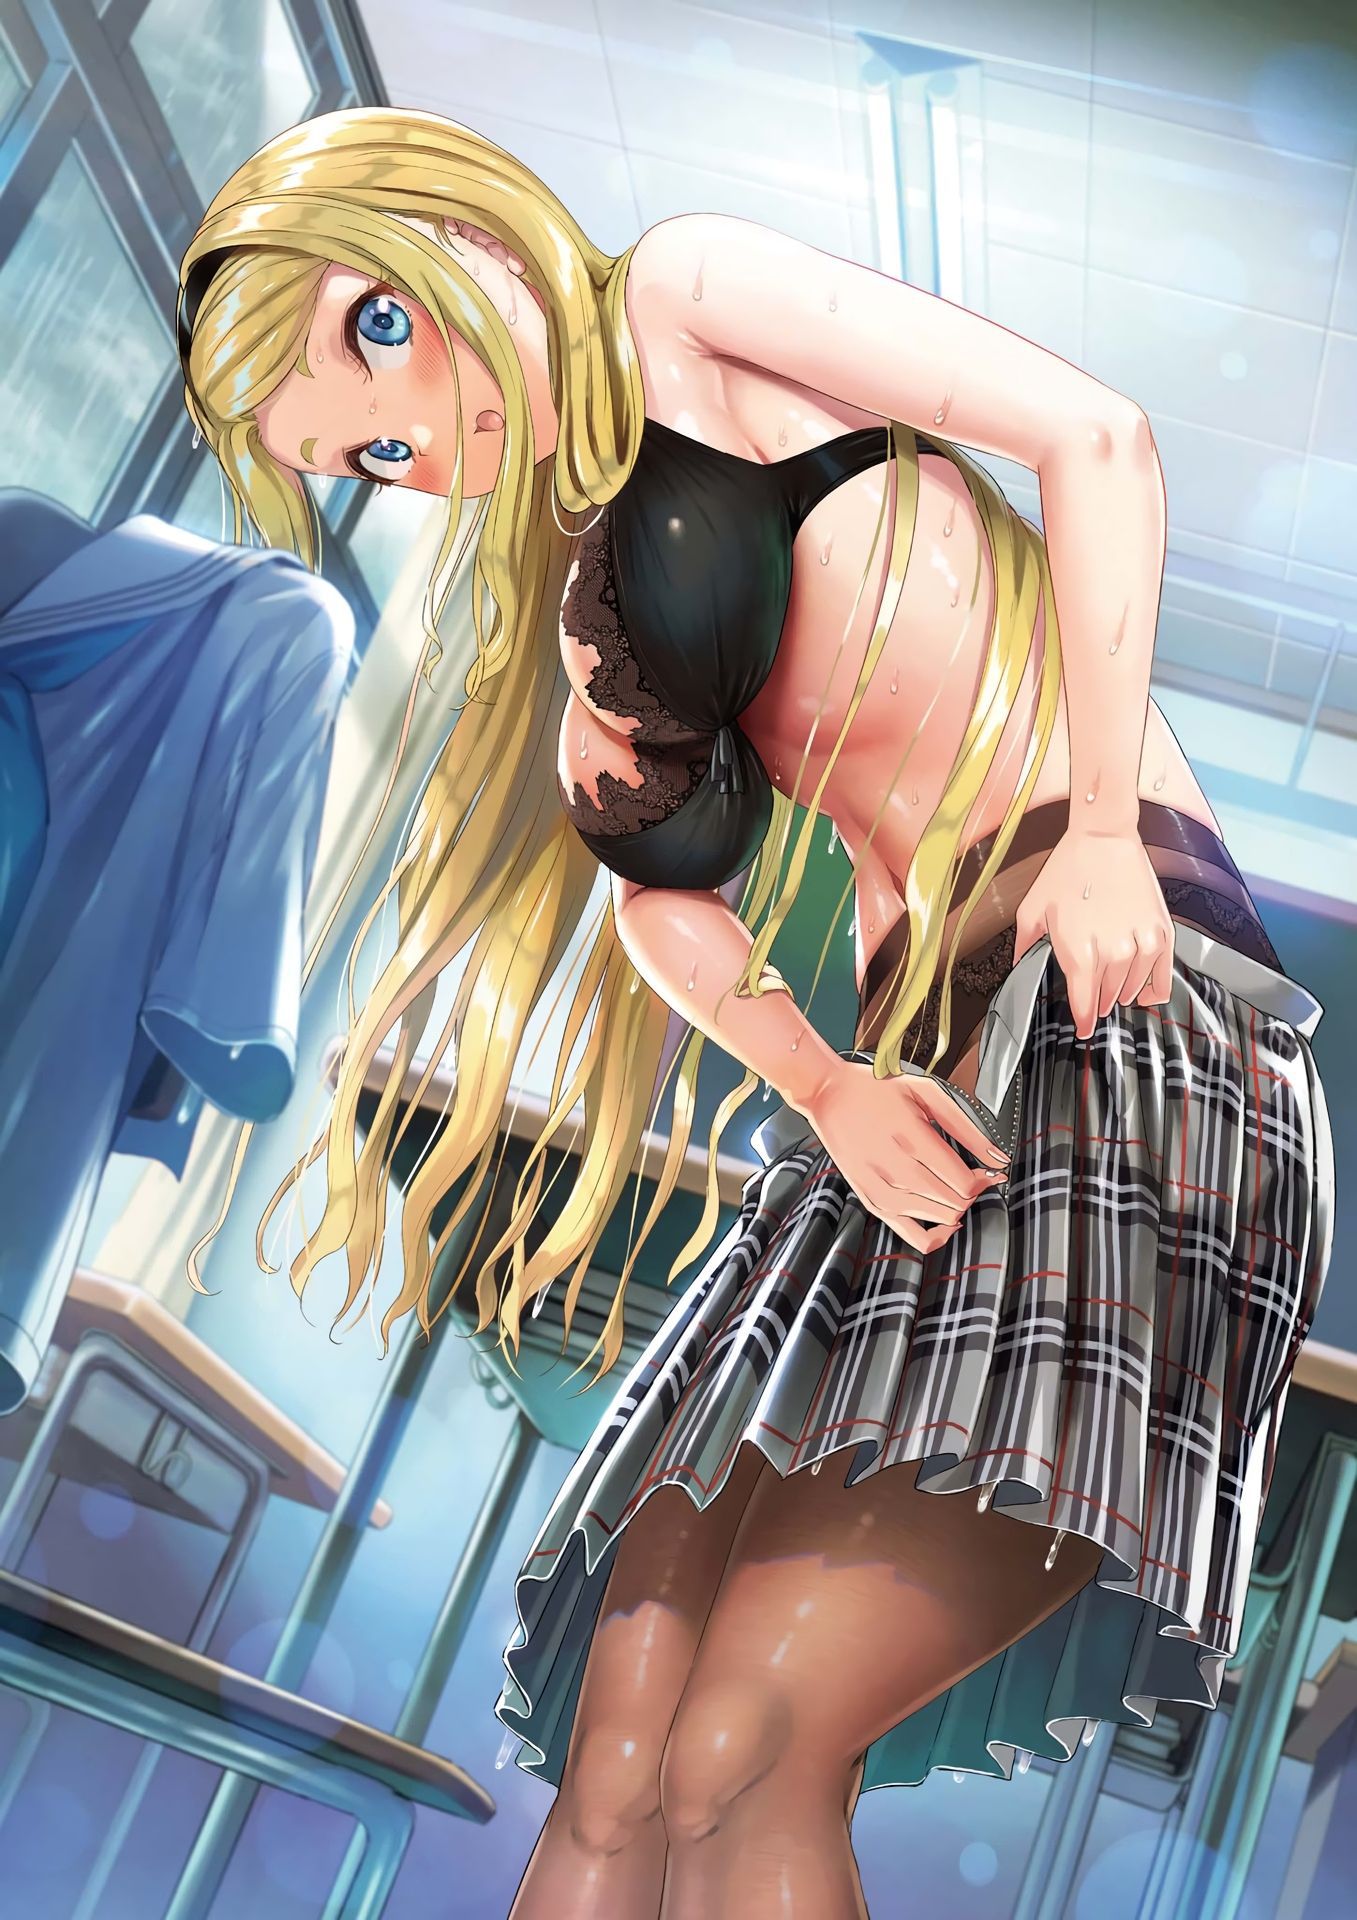 【Secondary Erotic】 Dosukebe Beauty and Beautiful Girls with Blonde Hair and Etchy Bodies 【Secondary Erotic】 11